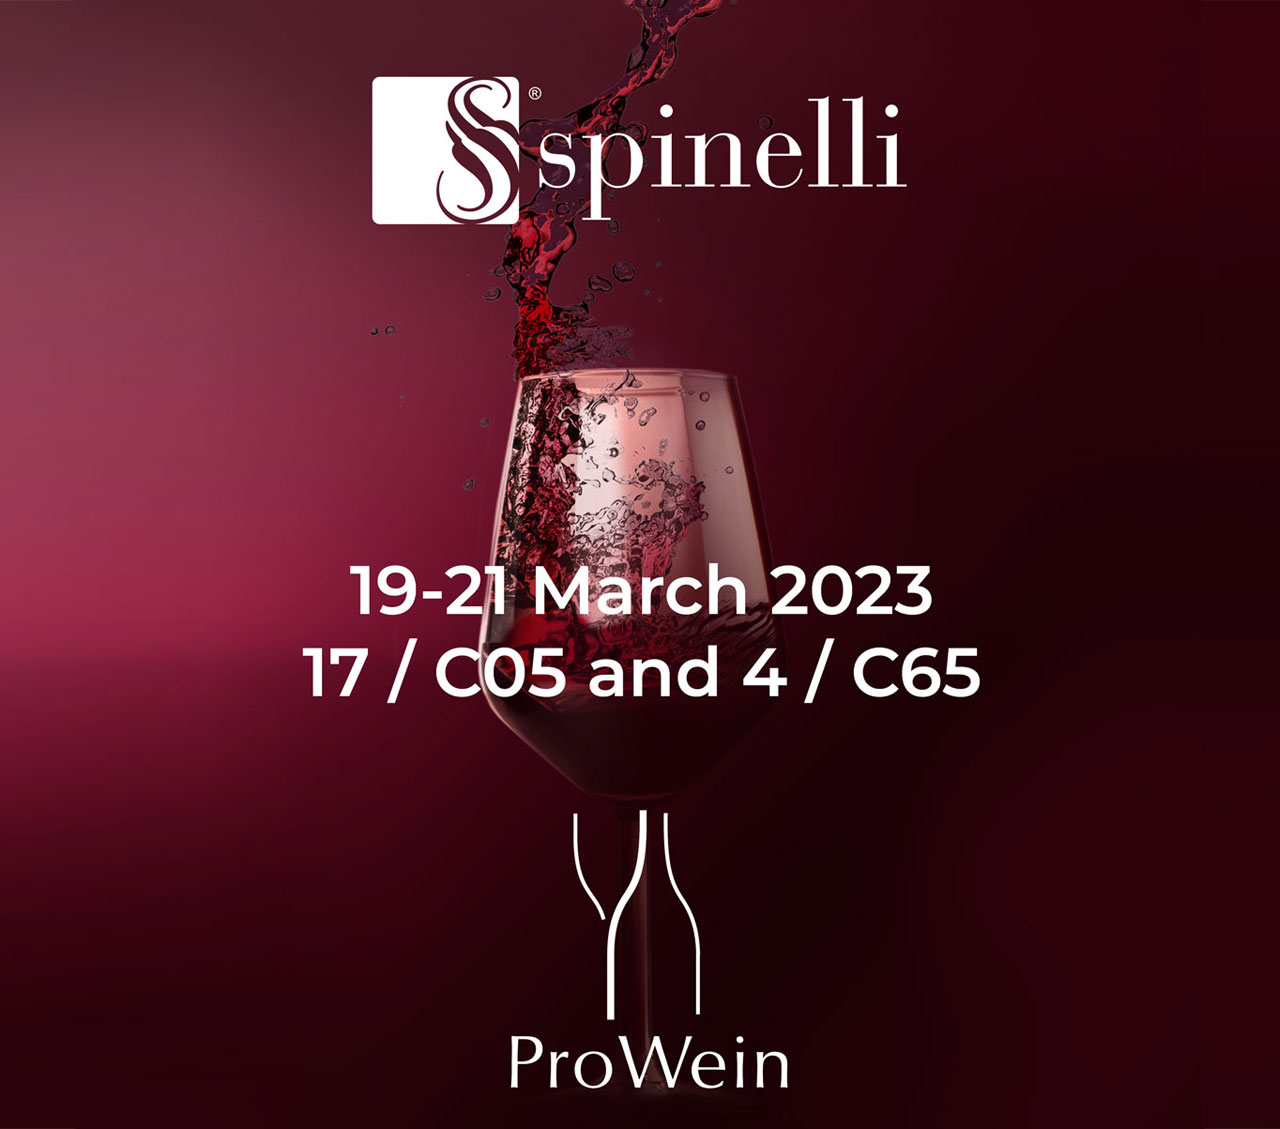 Cantine Spinelli at ProWein 2023, hall 17 stand C05 and hall 4 Stand C65